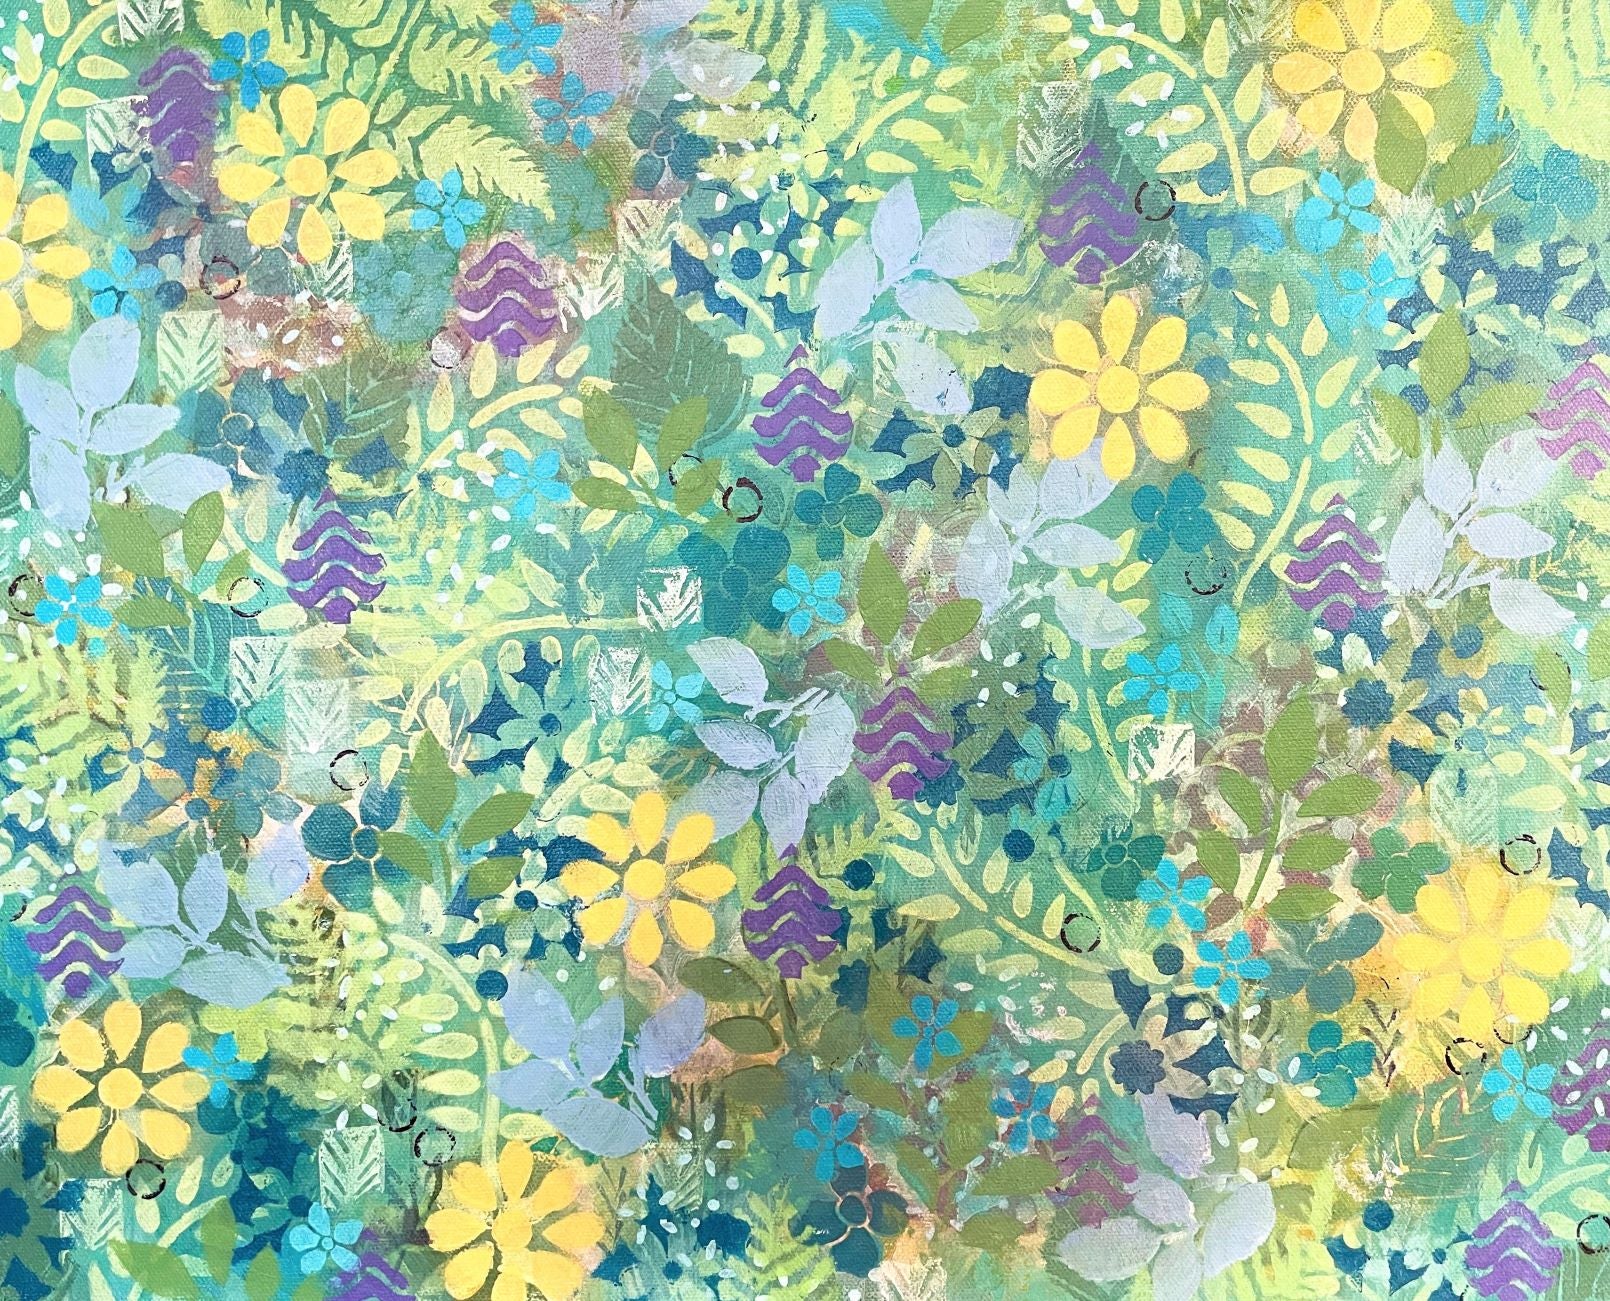 abstract floral painting on canvas sunny yellow flowers and small blue flowers green leaves purple accents refreshing jungle feel